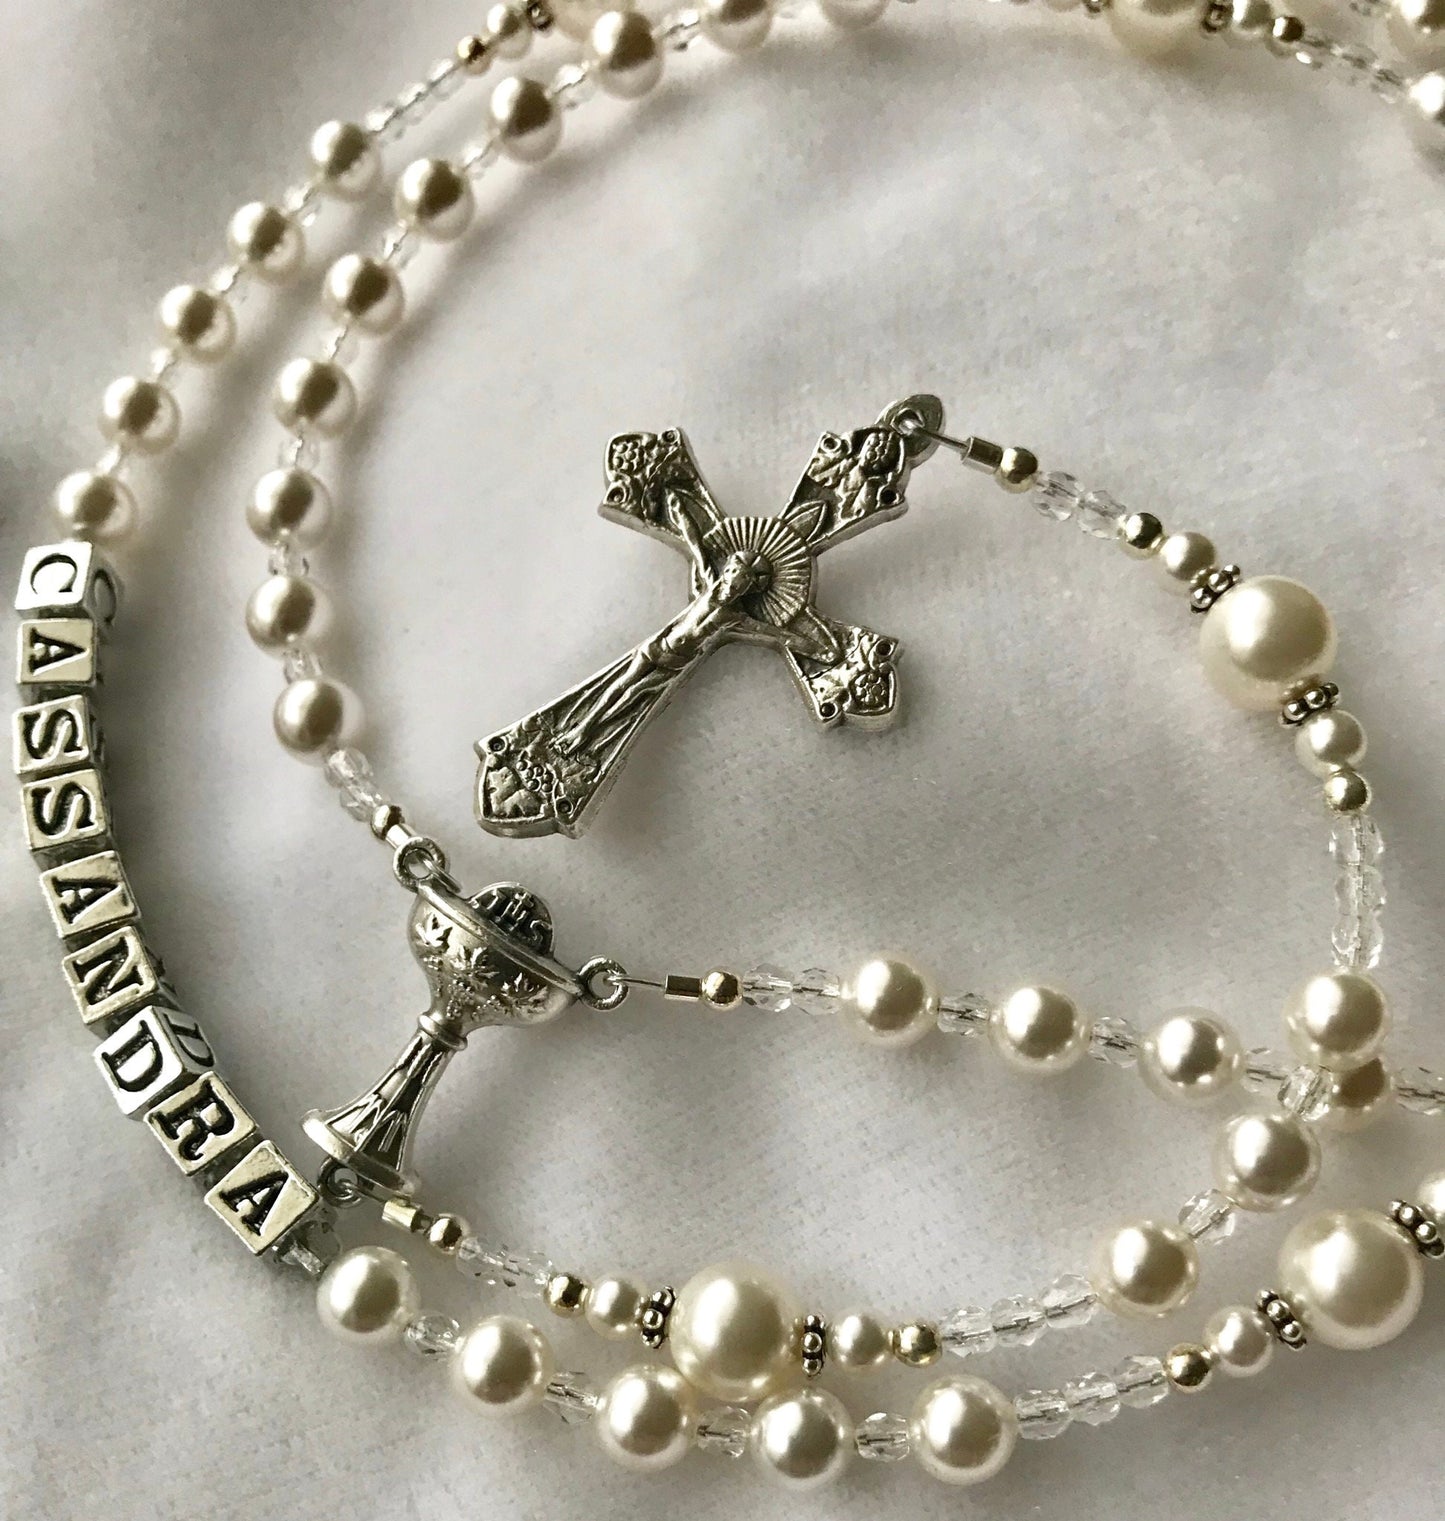 Personalized Pearl Rosary,First Communion Rosary,Christening Baptism Rosary,Religious Gift,Confirmation Sponser Gift Rosary,Godchild Rosary